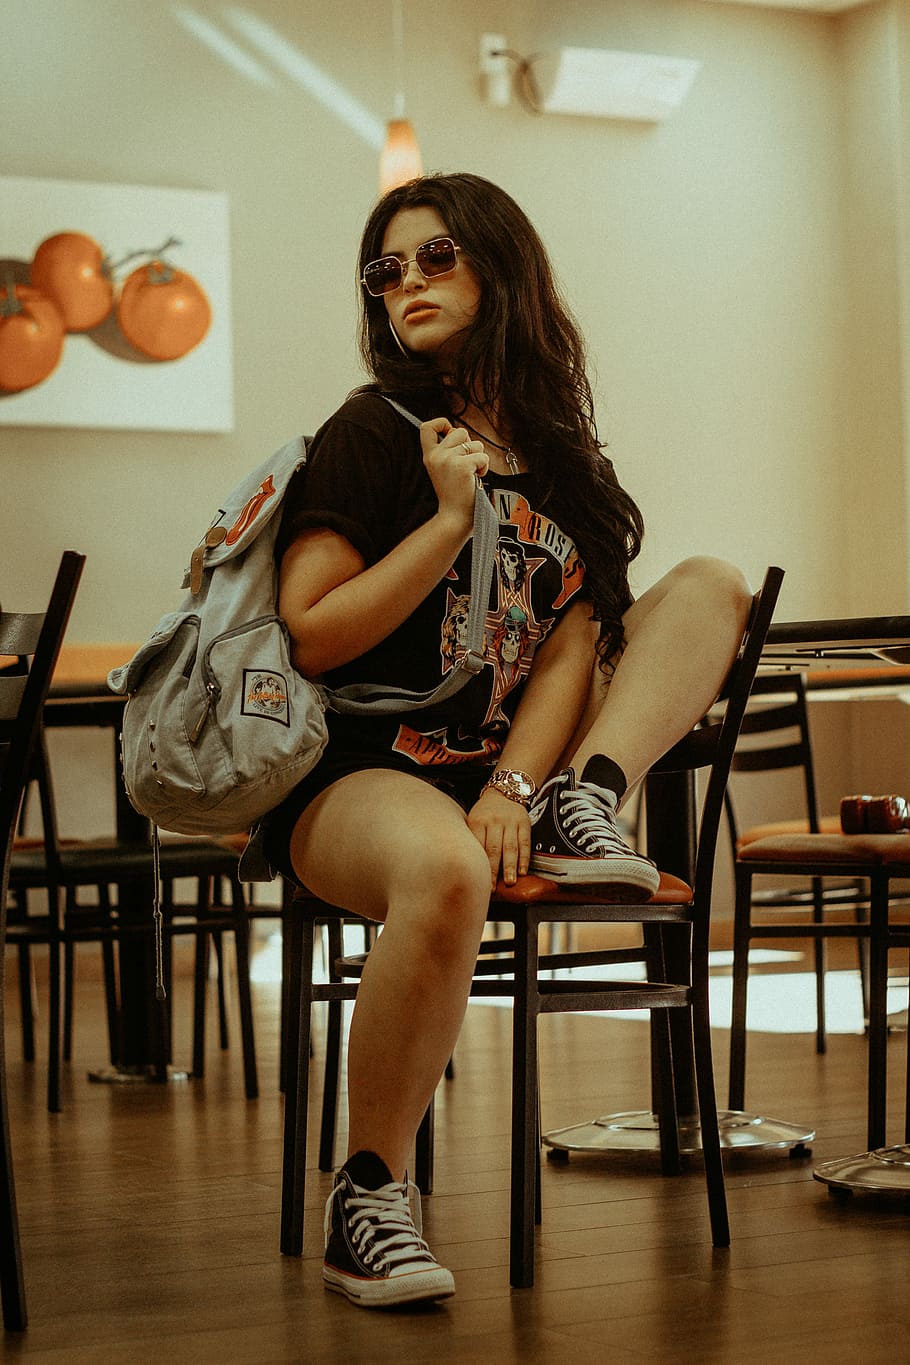 woman sitting on brown wooden chair, portrait, sunglasses, backpack